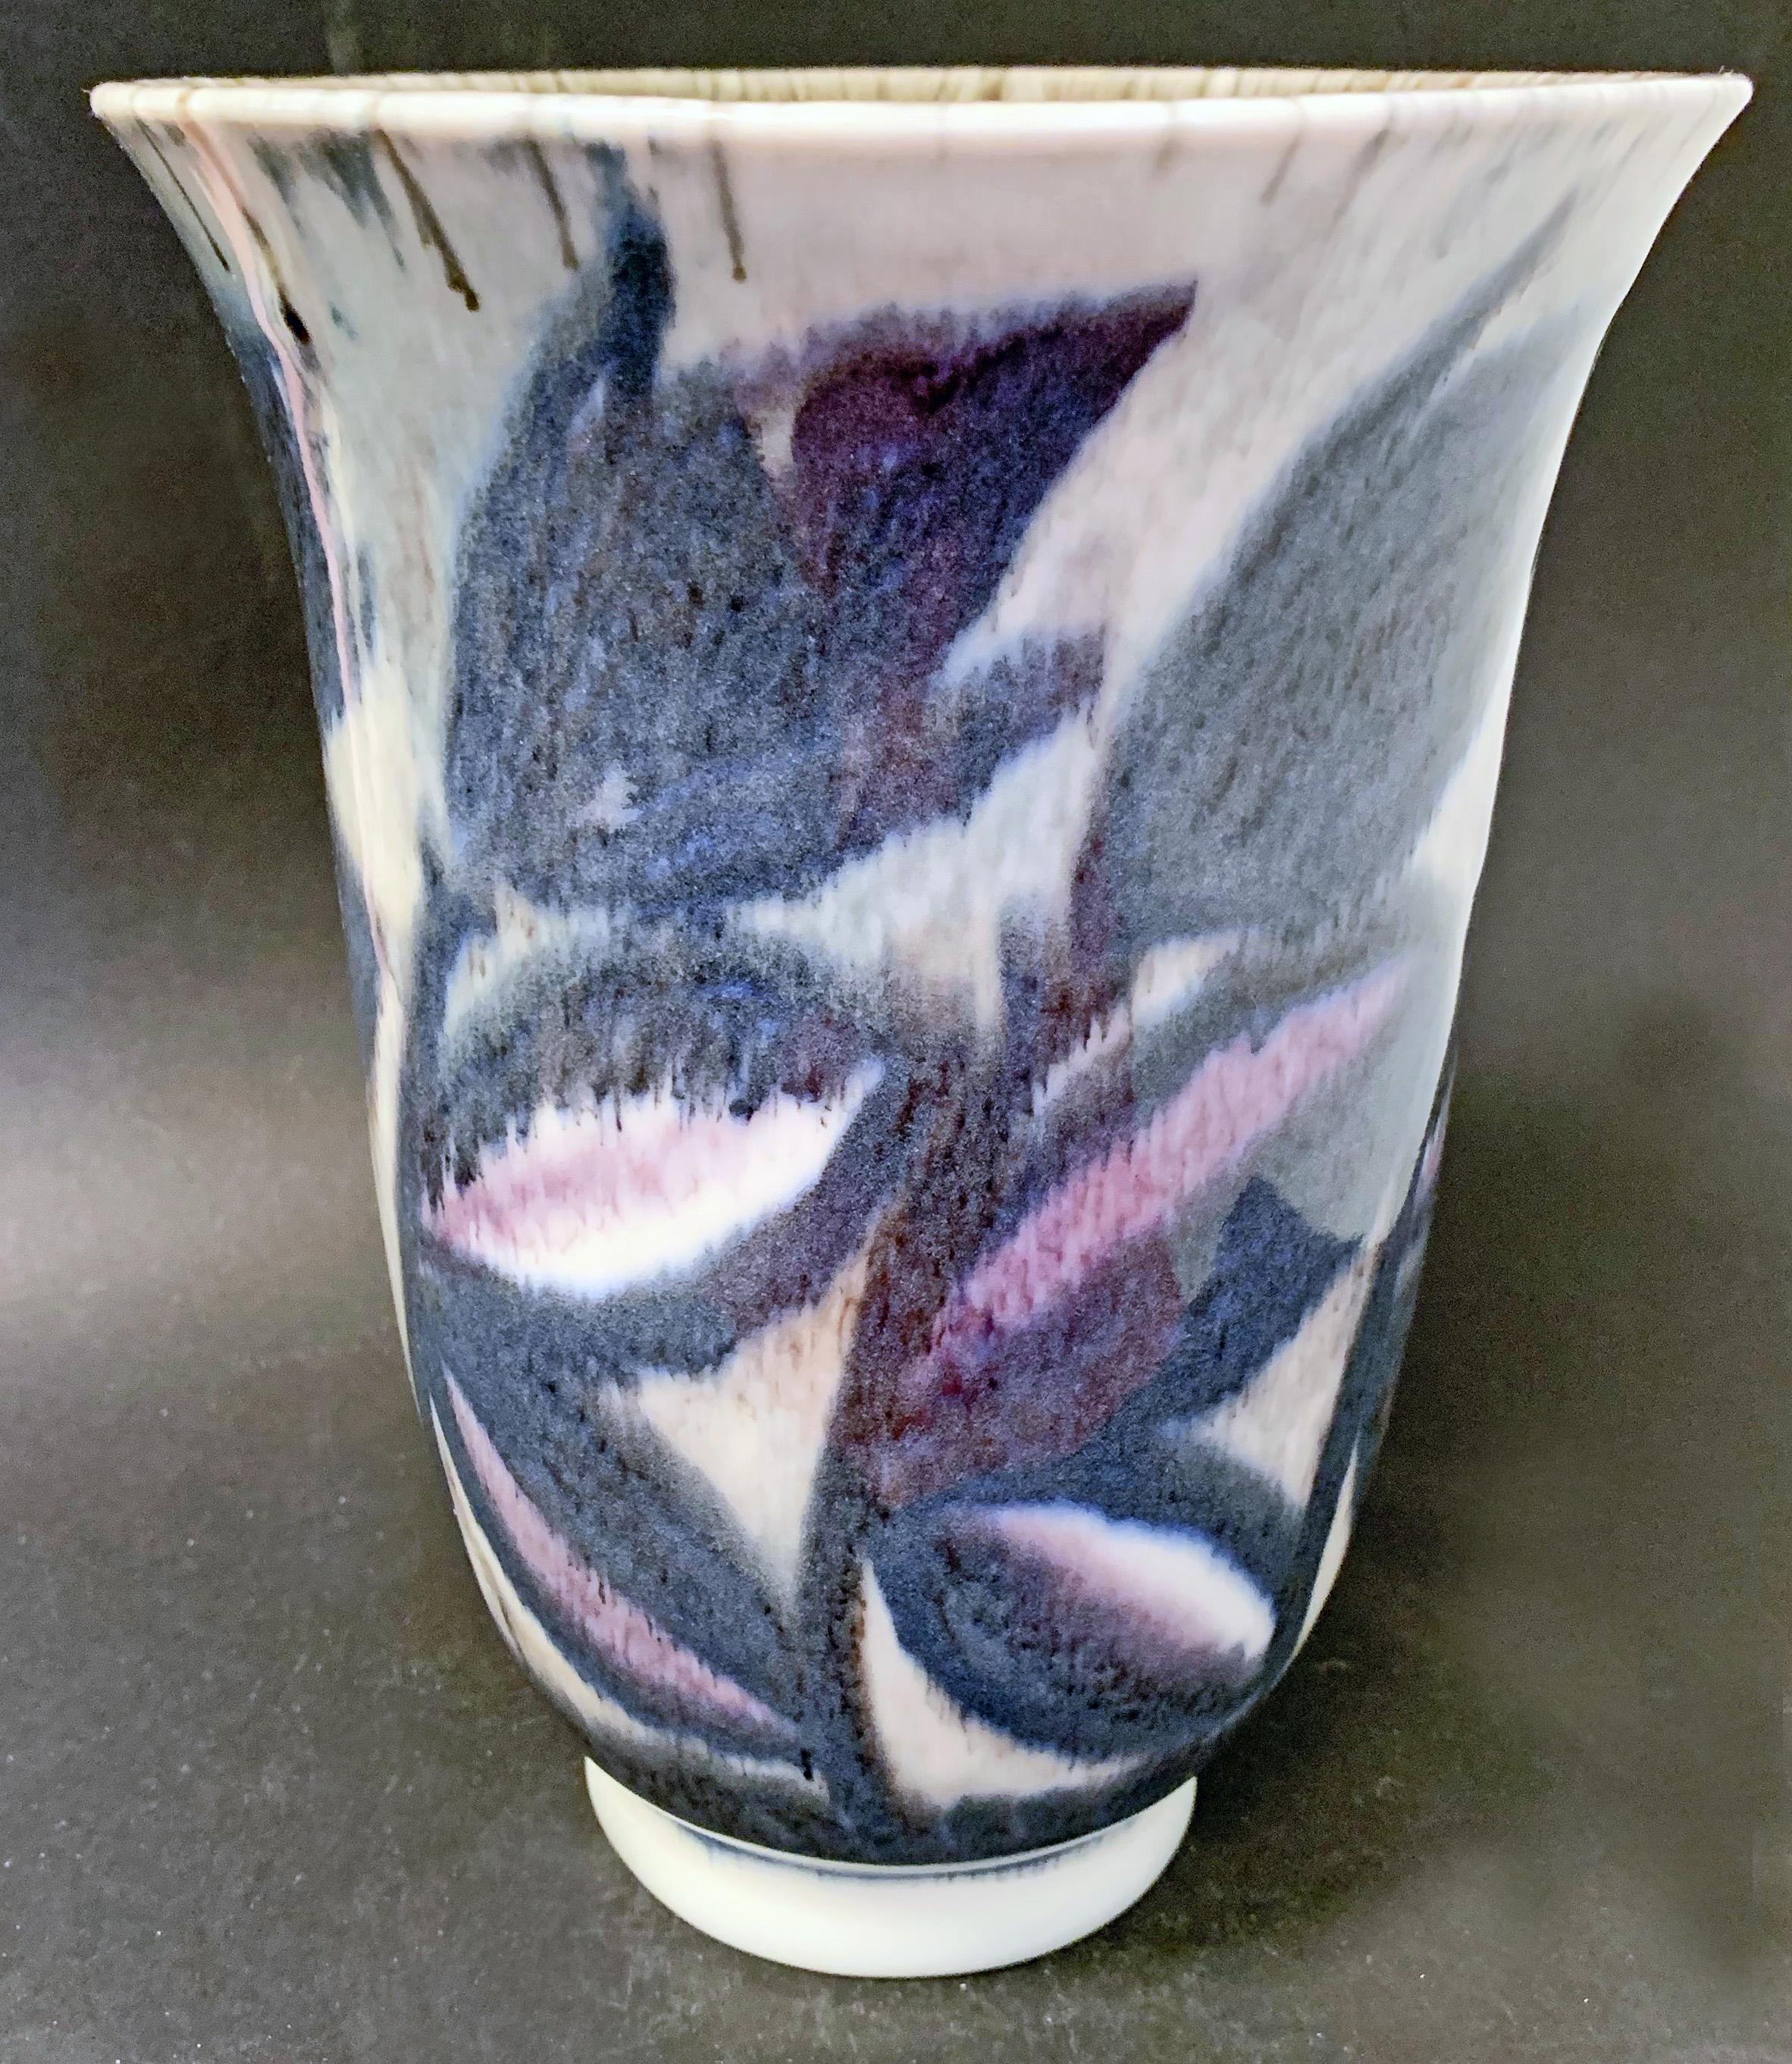 Equal to the finest Art Deco vases produced in France in the 1930s, this flaring vase is covered in large flowers and leaves in charcoal and deep rose, all in the suffused, dripping glazes perfected by William Hentschel, the artist. Hentschel was